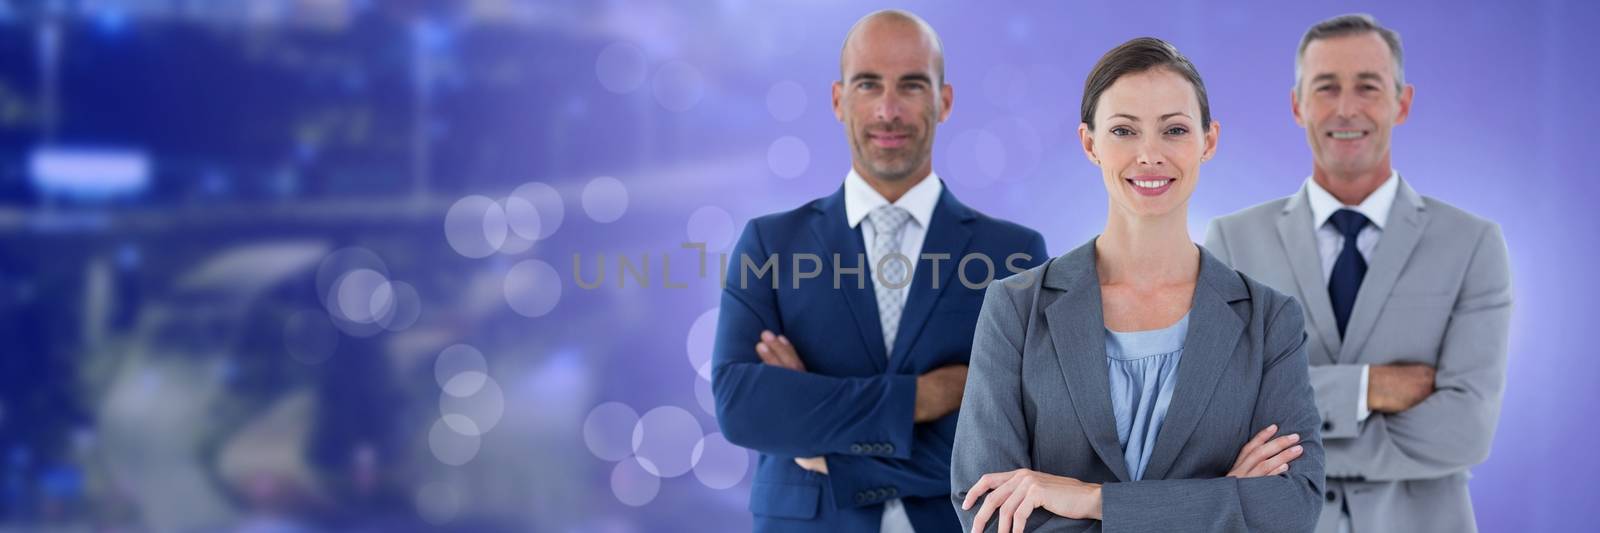 Digital composite of Business people and City with flare light source